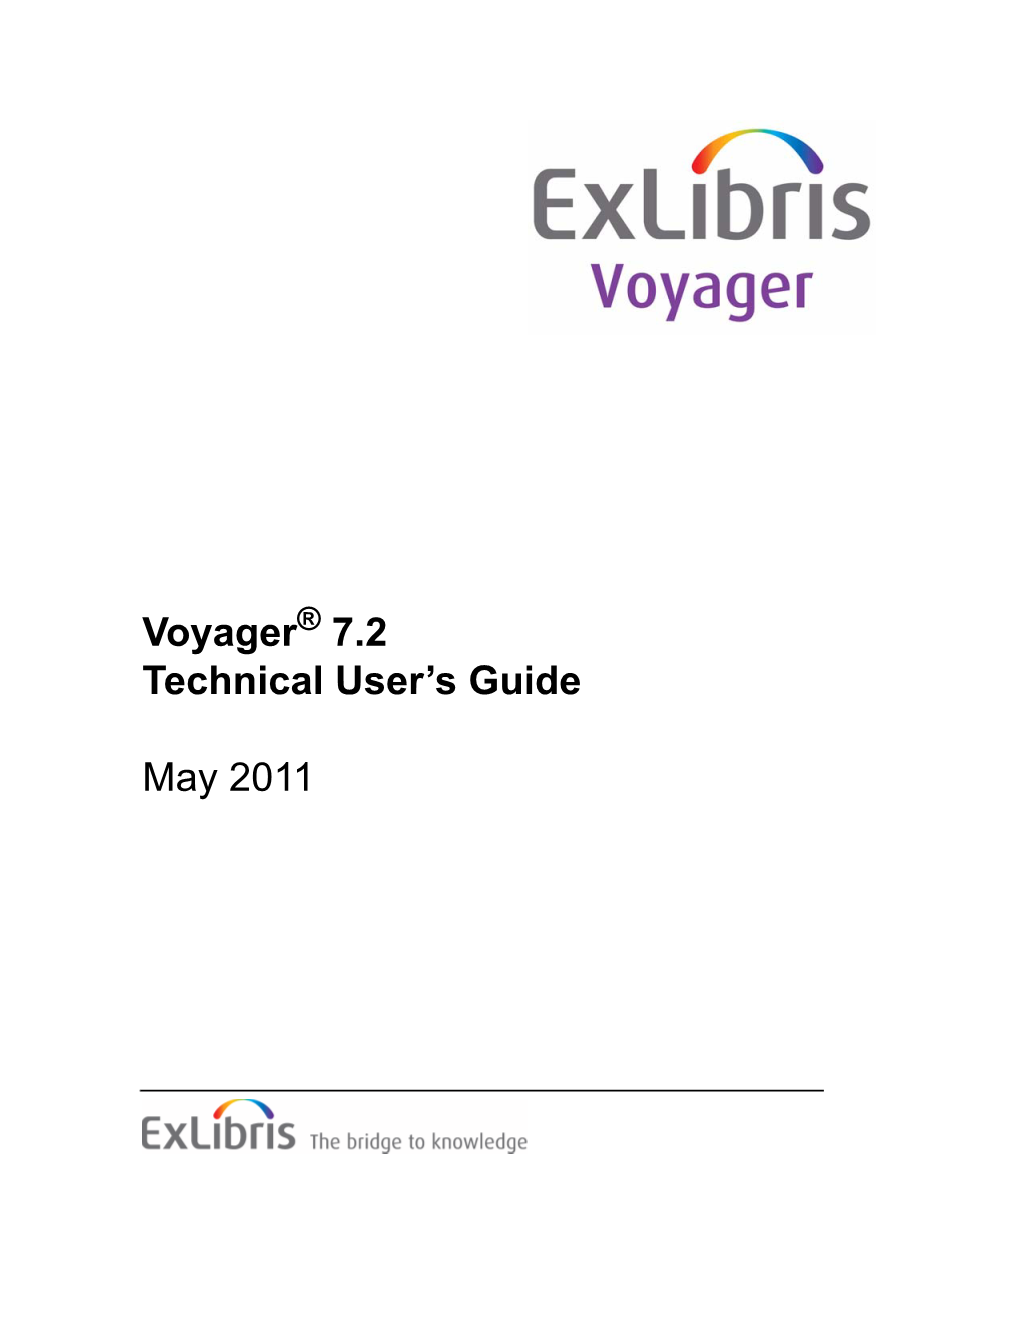 Technical User's Guide